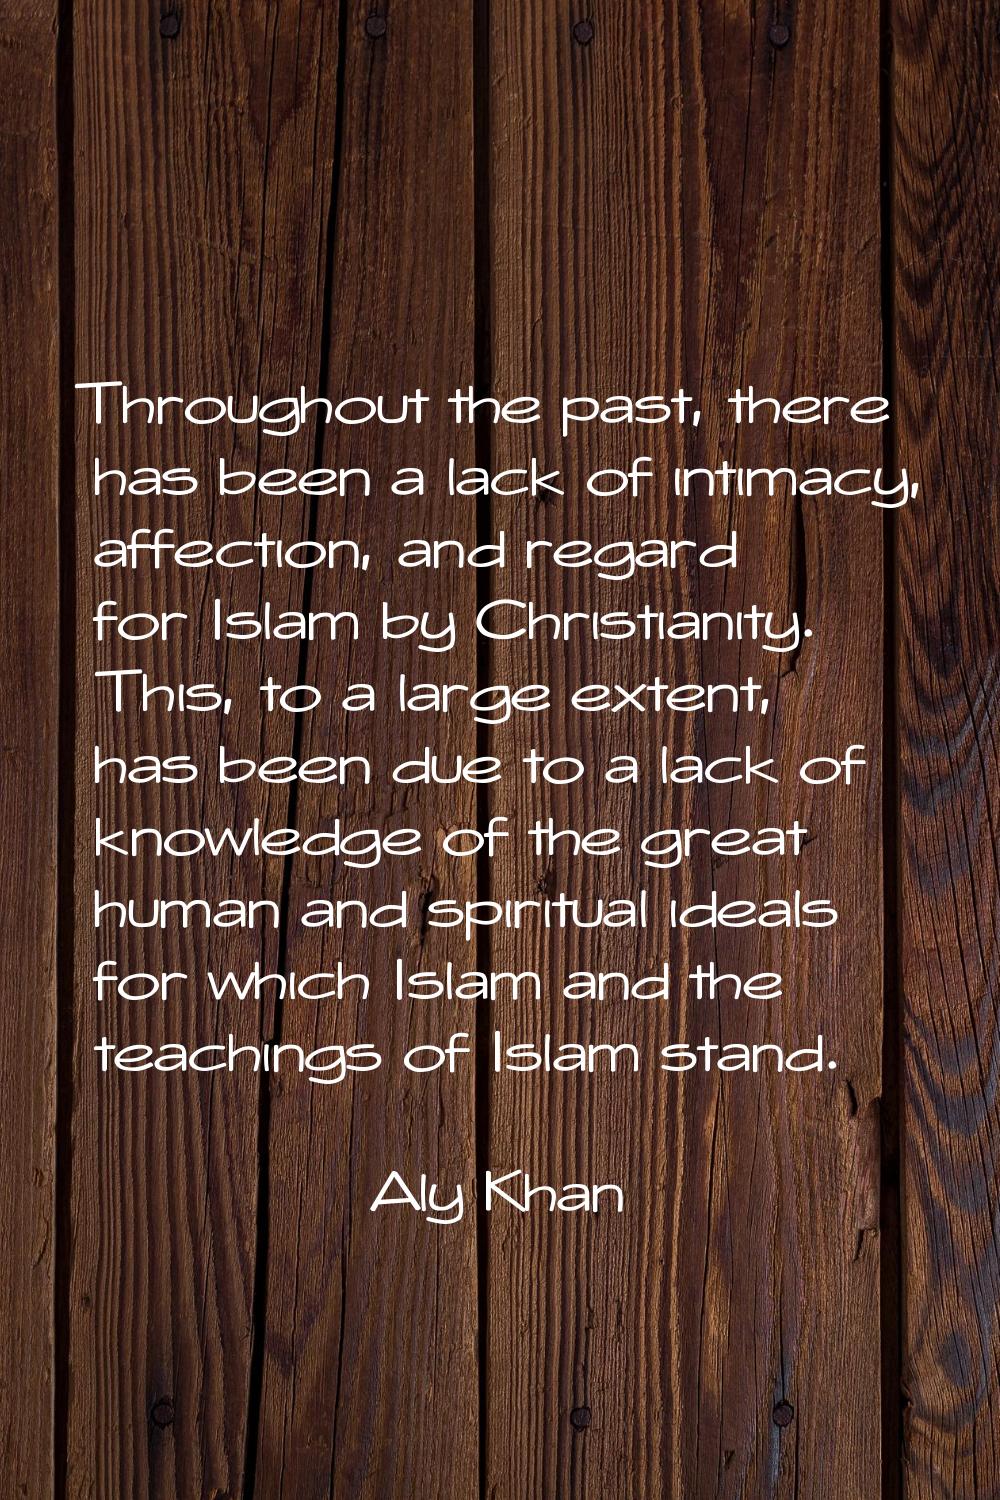 Throughout the past, there has been a lack of intimacy, affection, and regard for Islam by Christia